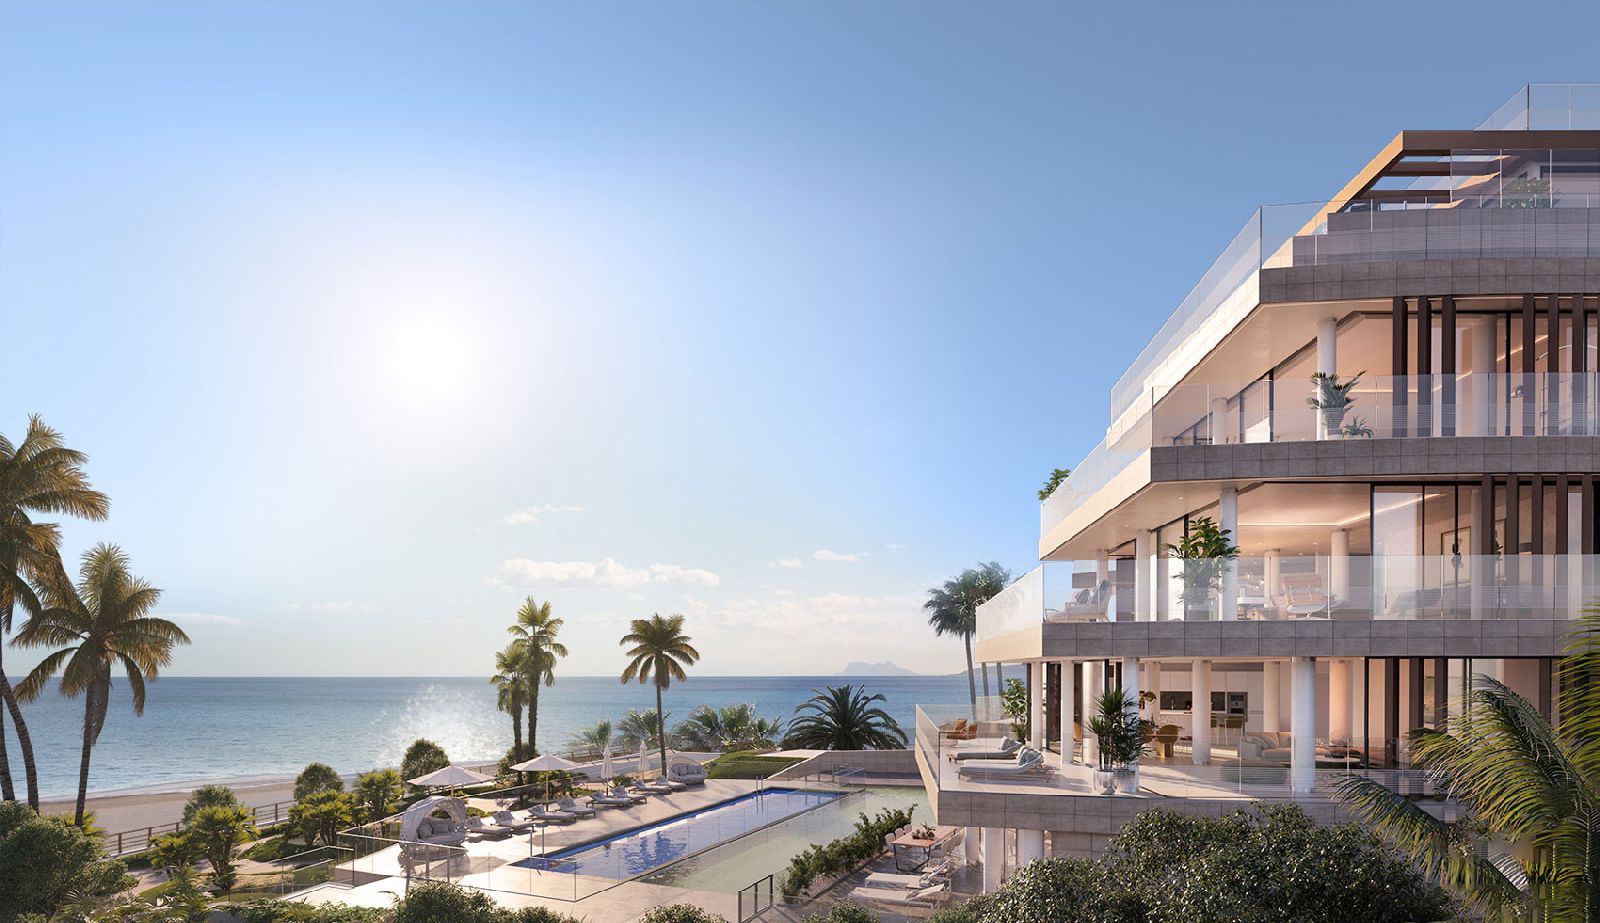 Exclusive boutique development of luxury apartments in the first line of Estepona